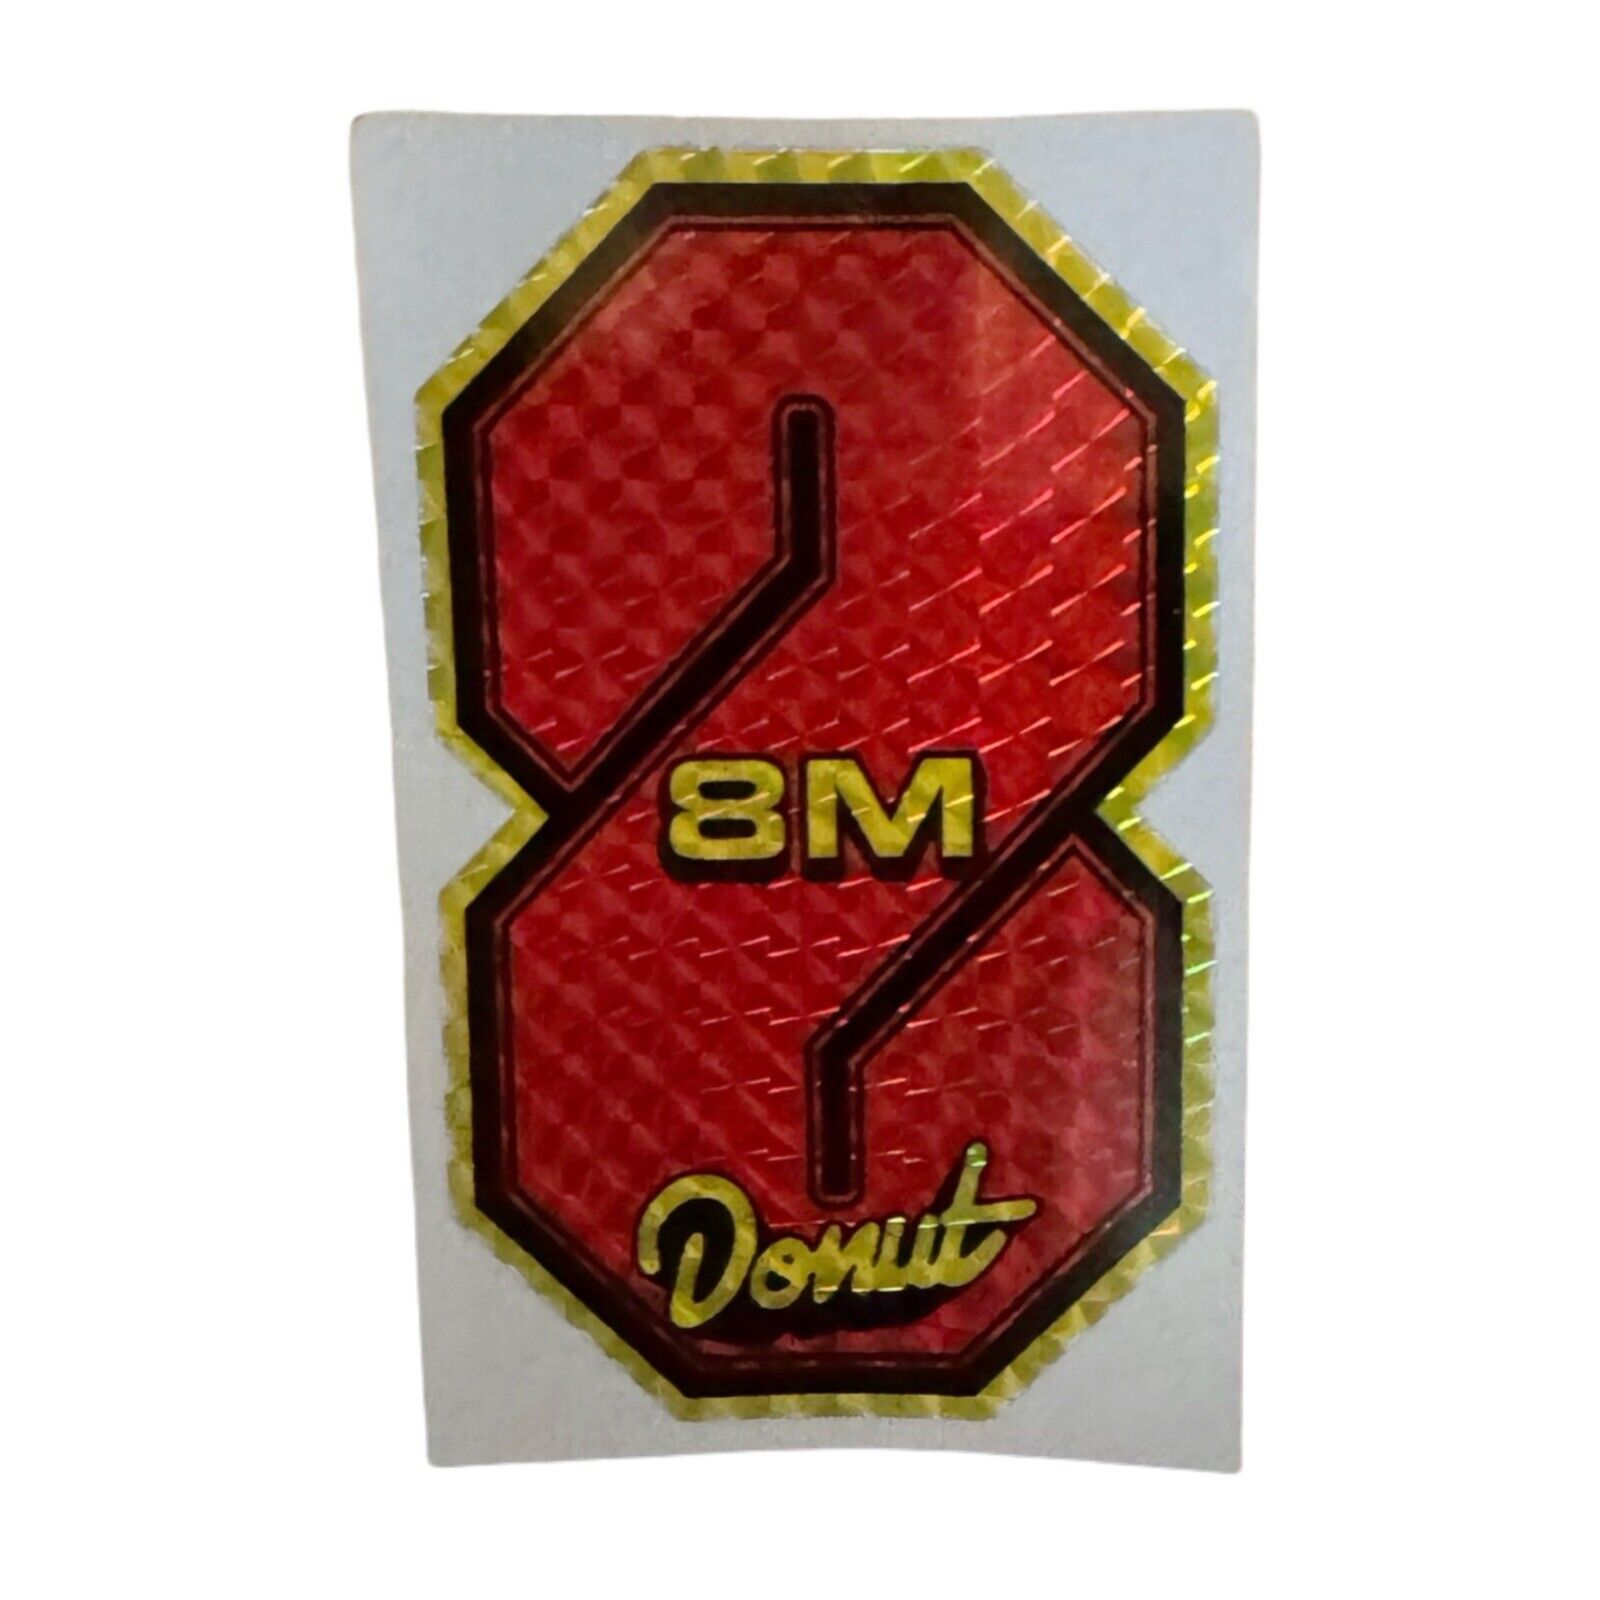 Donut Media 8 Million Subscriber Sticker - Limited Edition - Sold Out